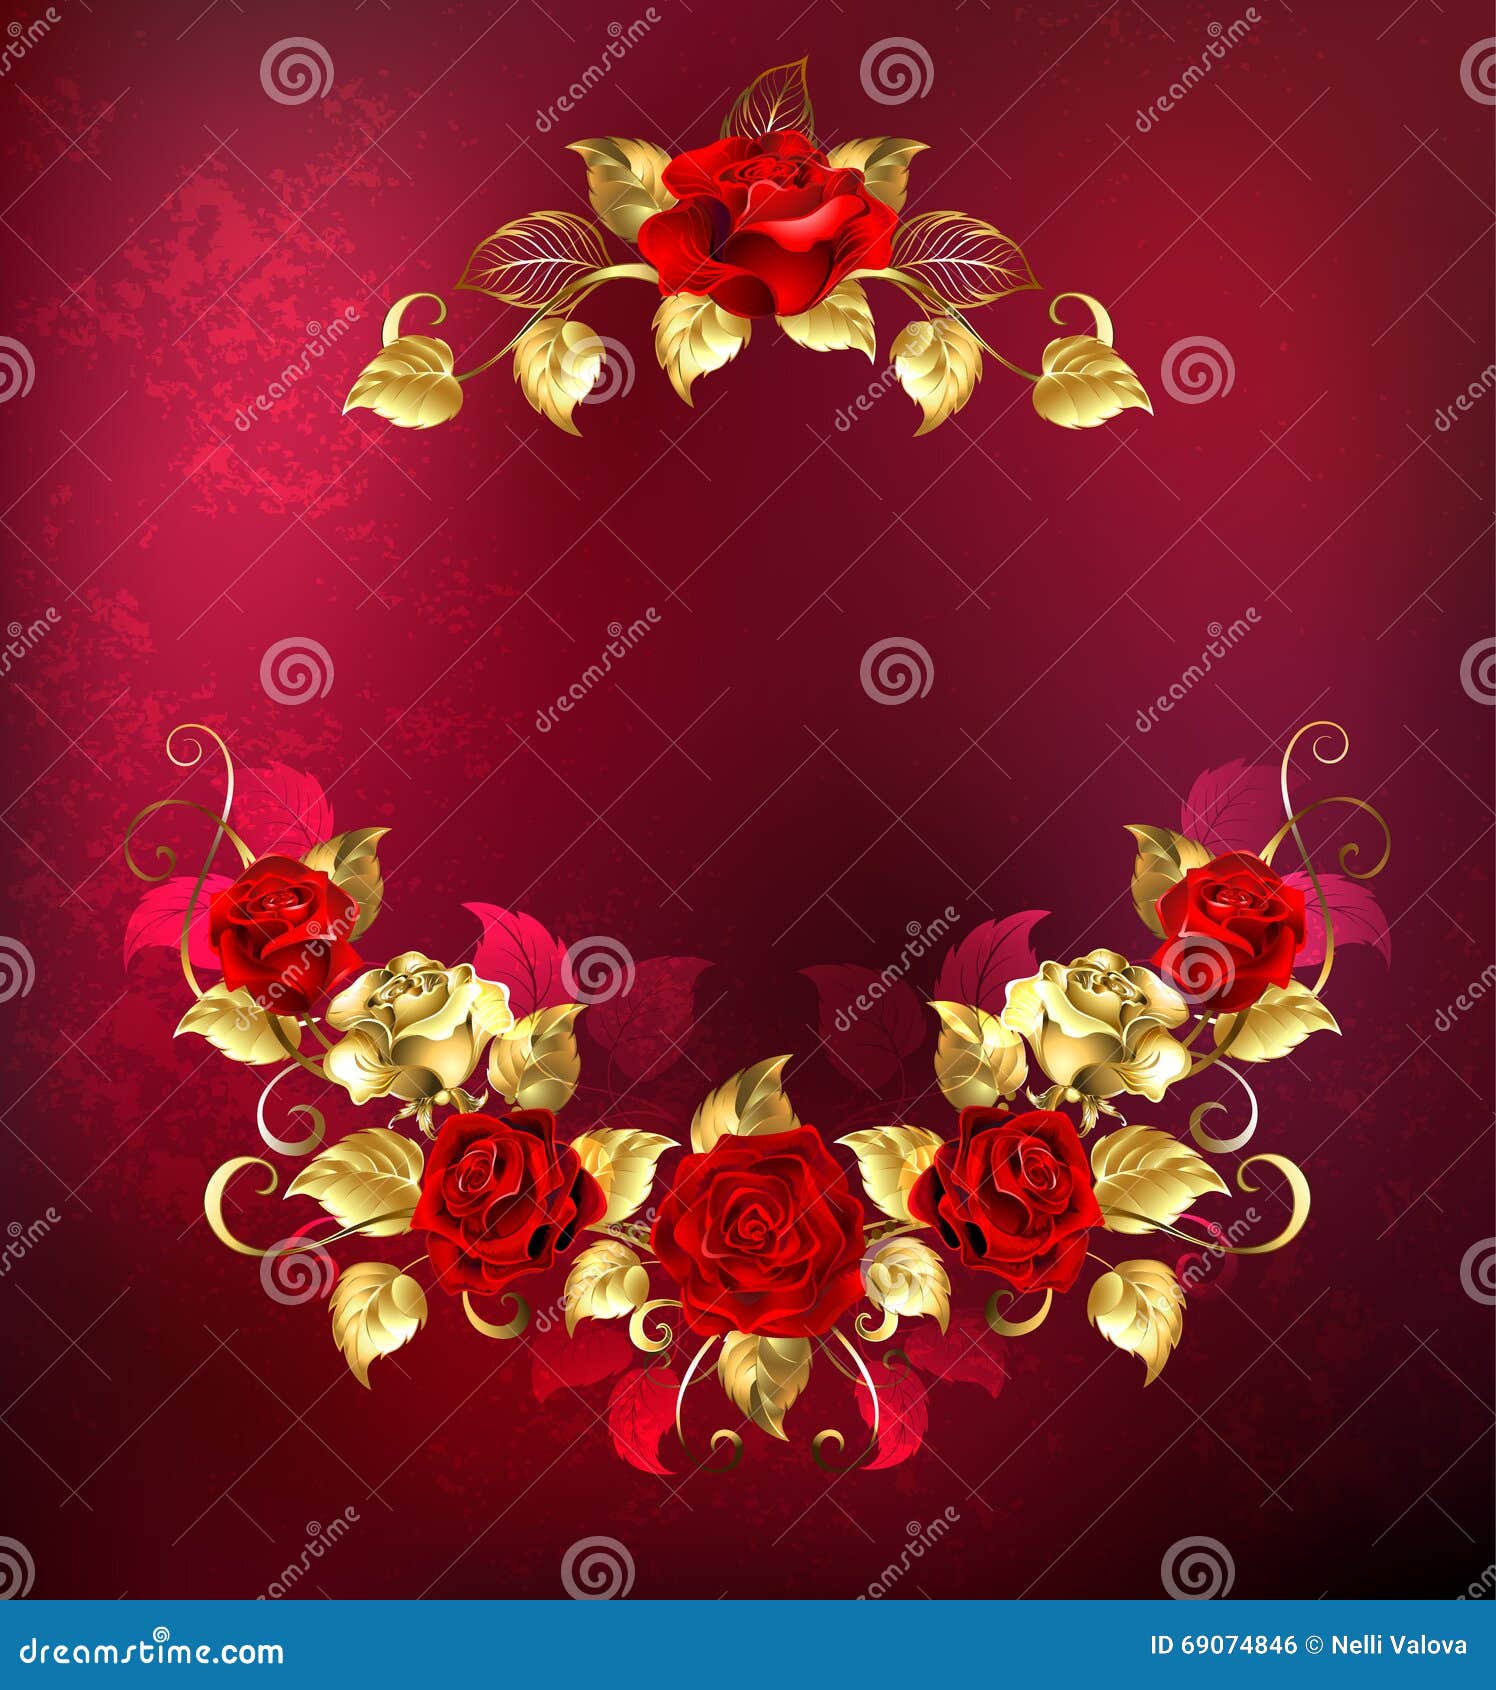 symmetrical garland of gold and red roses